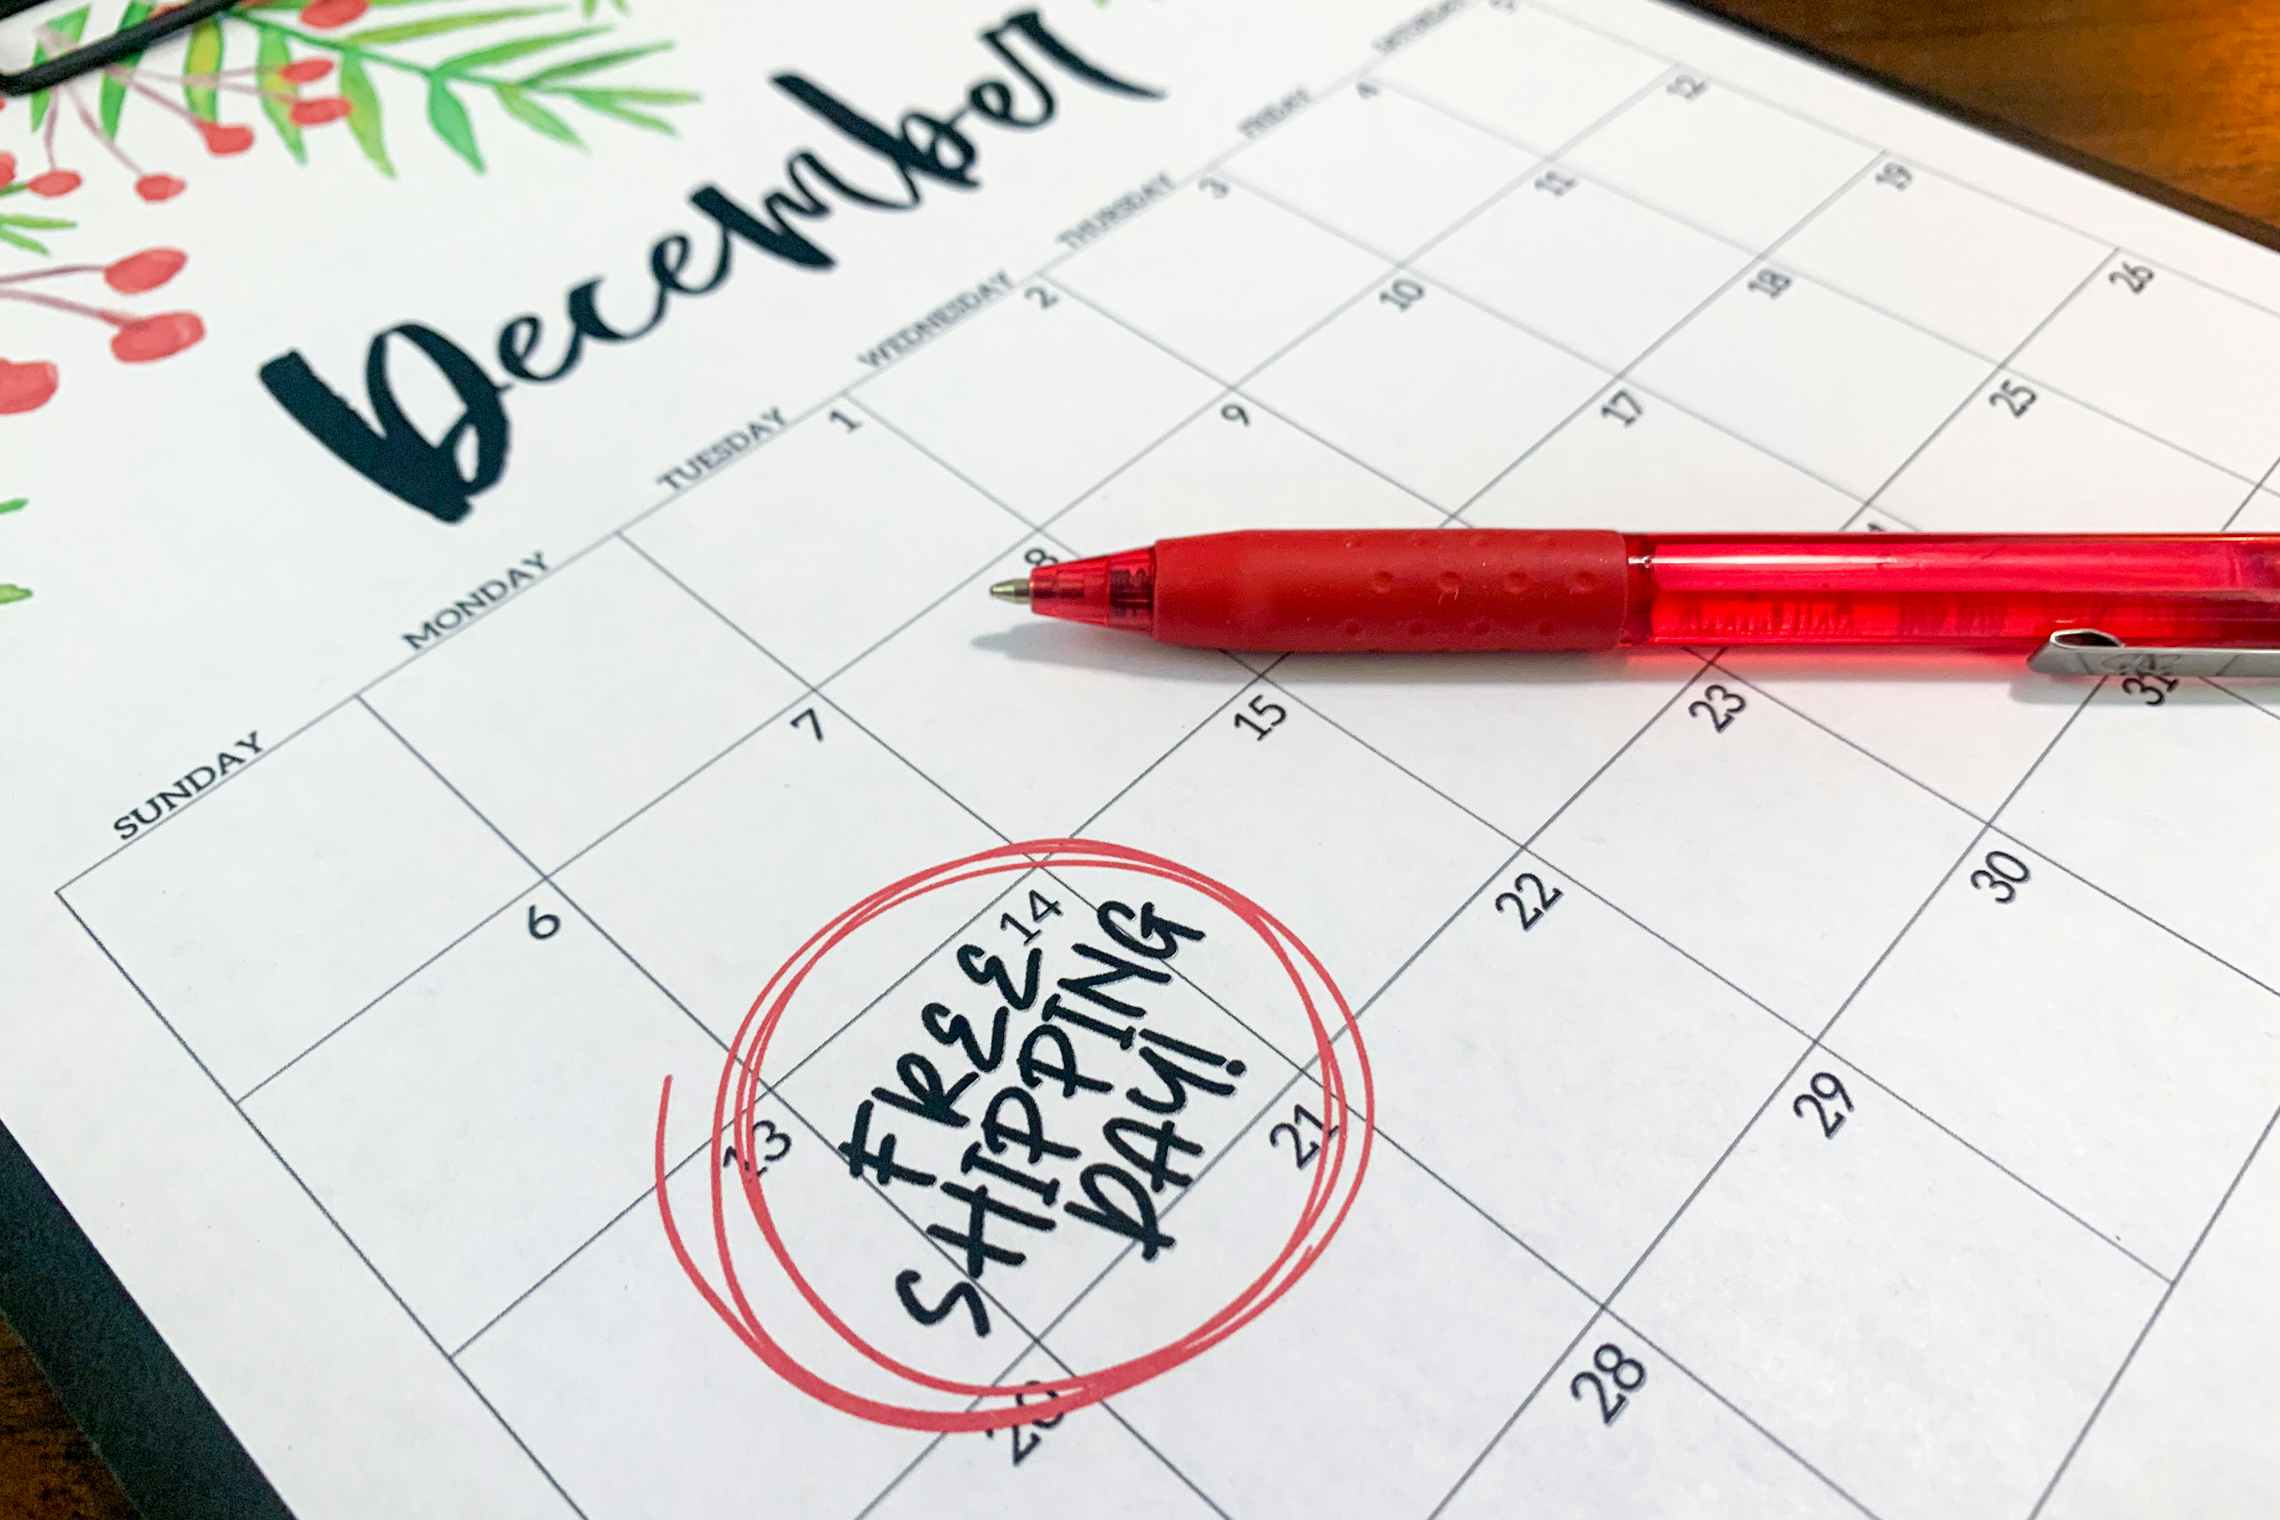 A calendar for December with "Free shipping day" written and circled on the 14th.